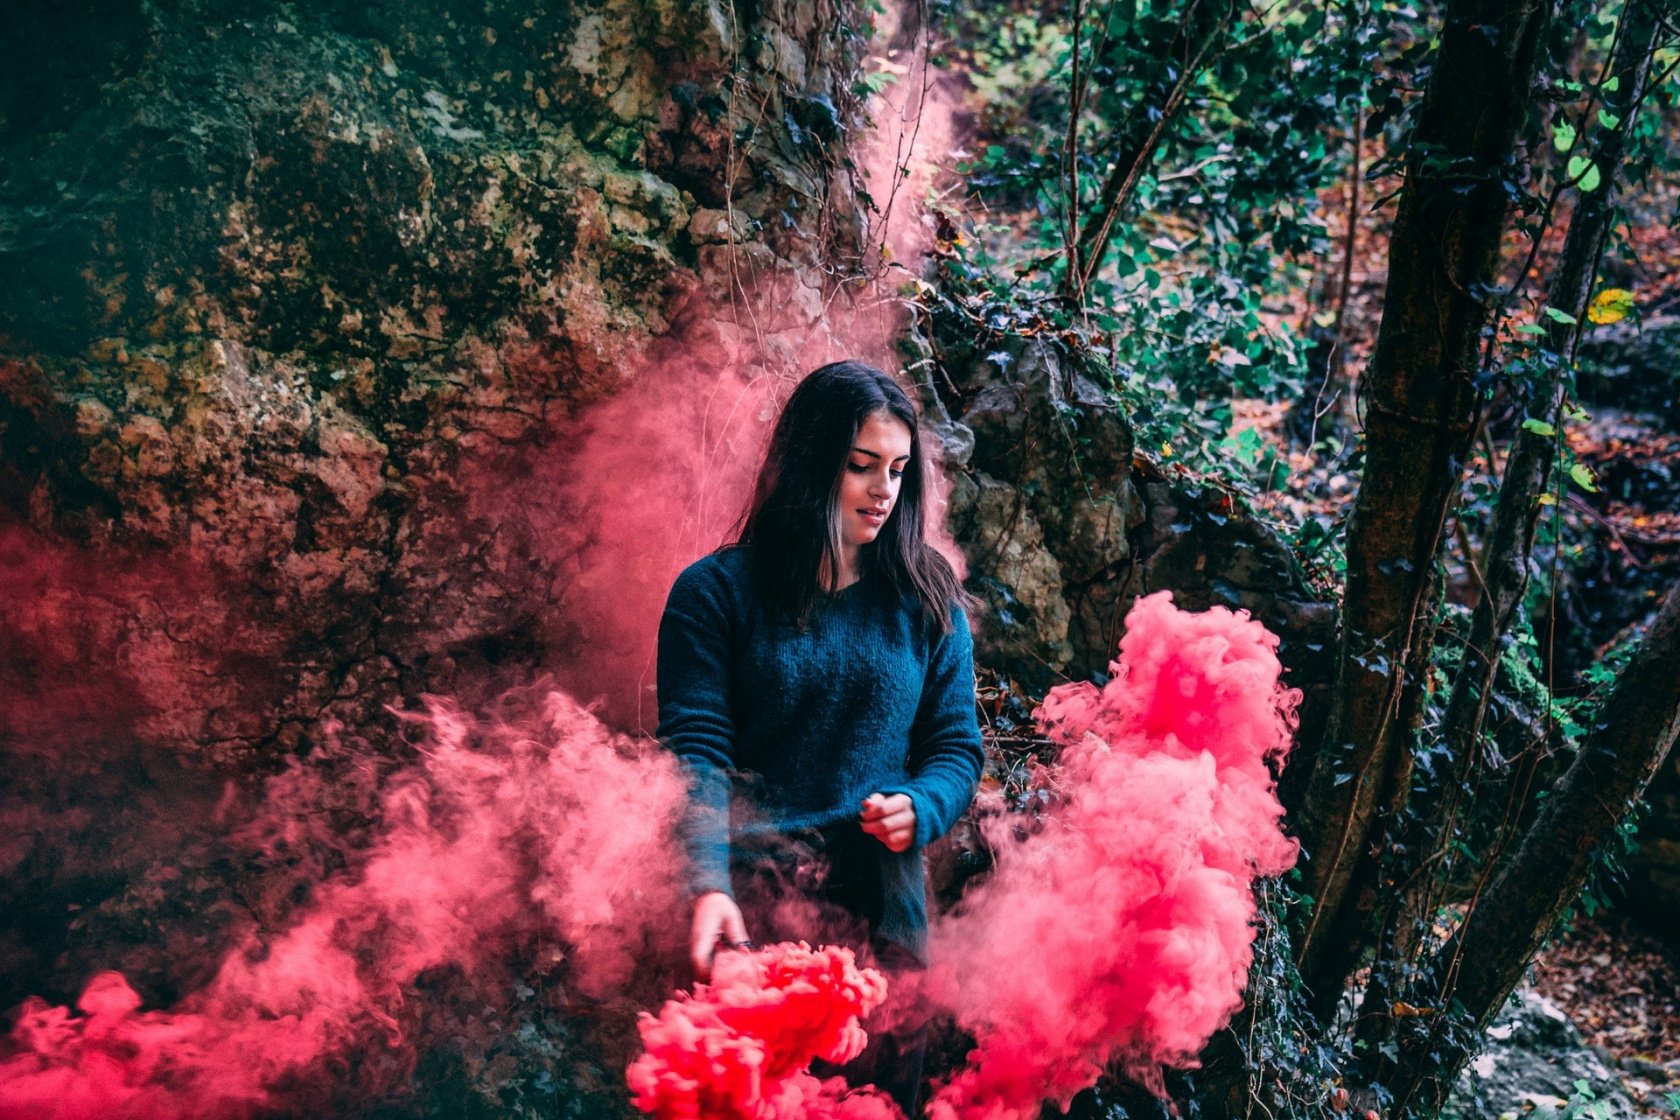 Smoke Bomb Photography You Can Master Quickly and Easily Image4